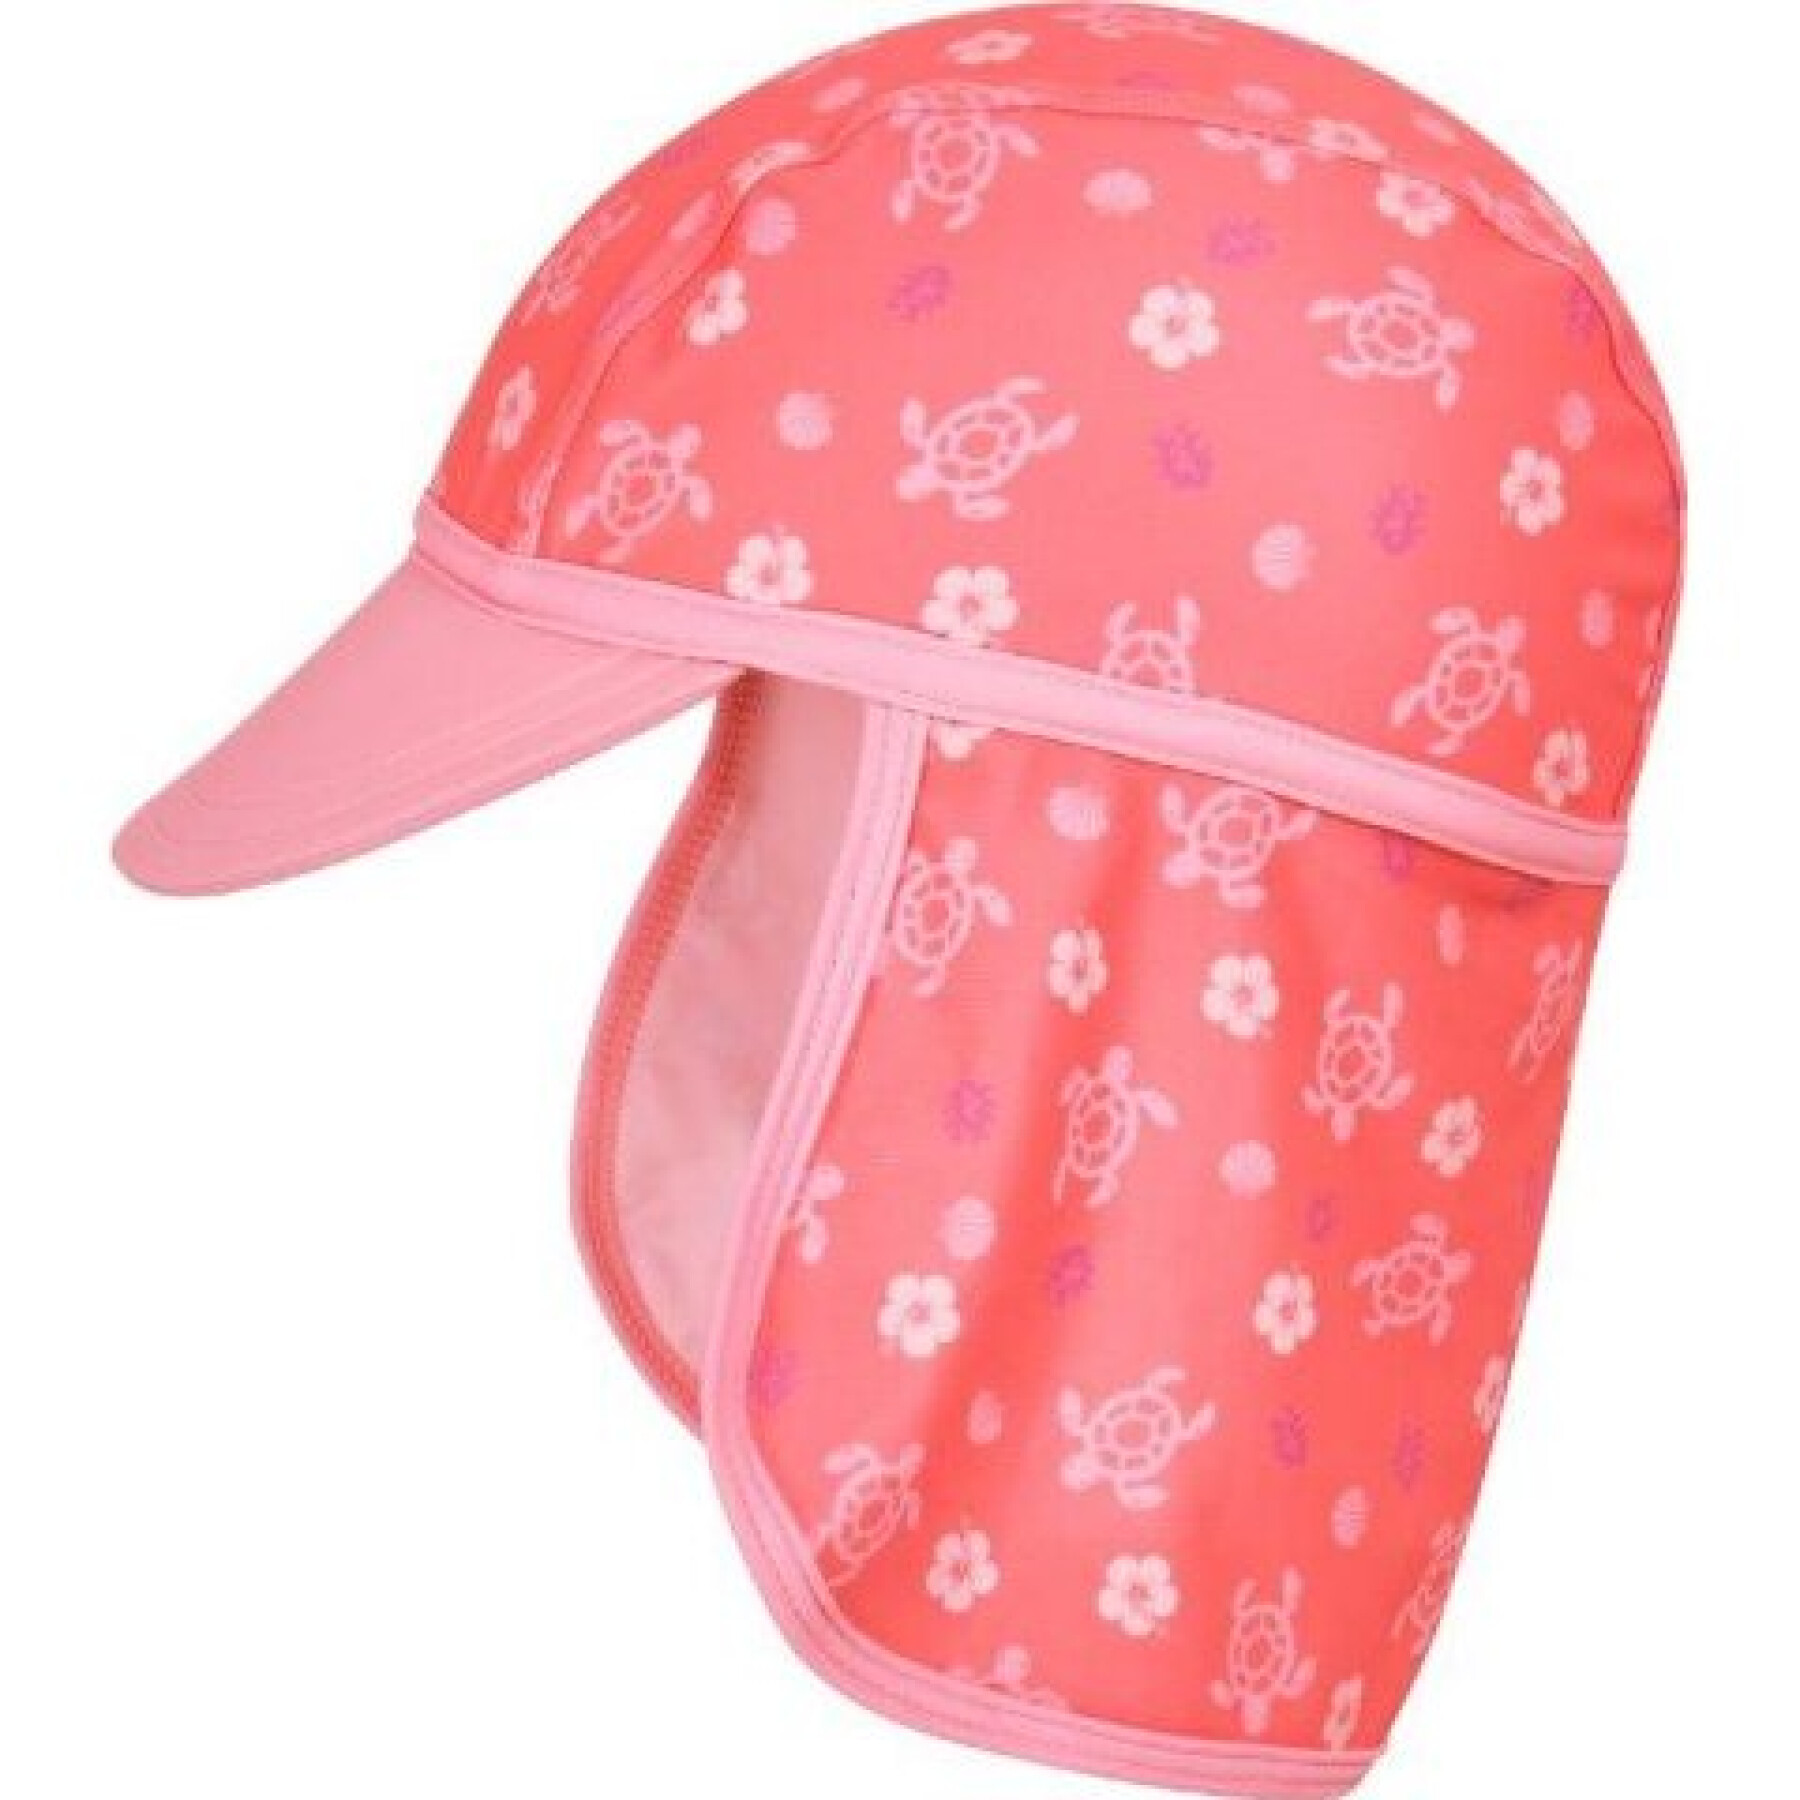 Children's uv protection cap Playshoes Hawaii